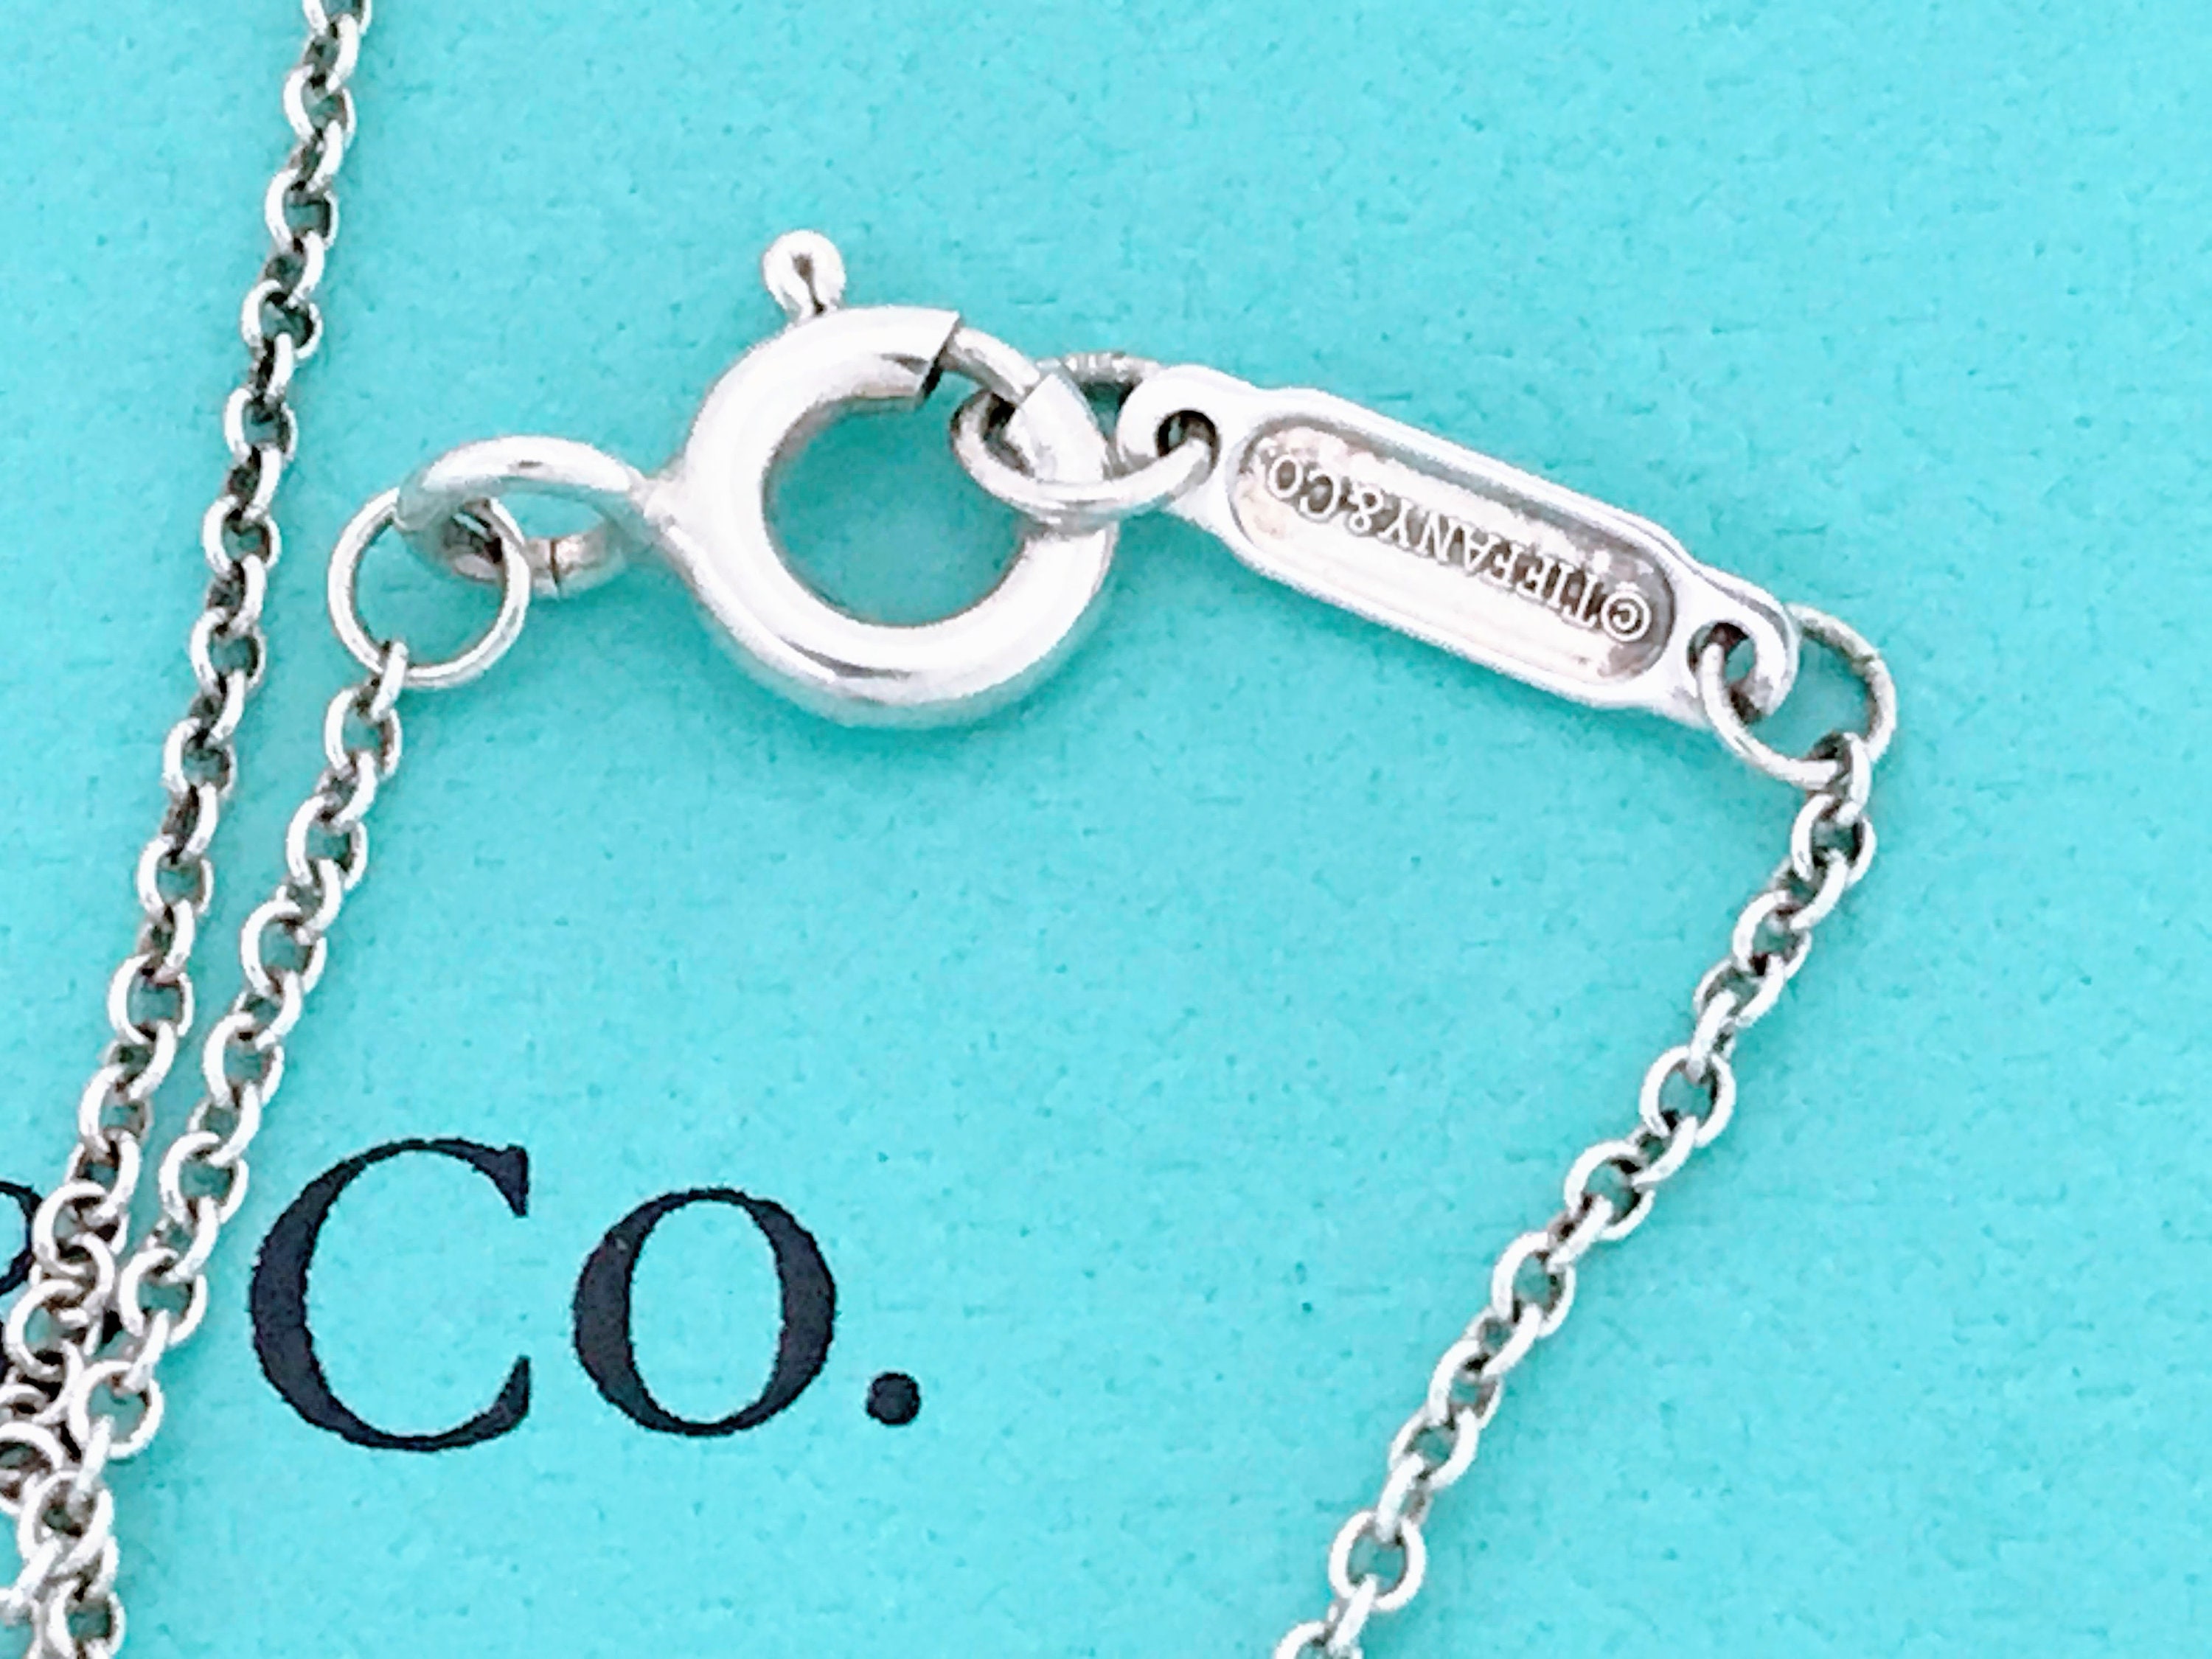 Tiffany & Co. Sterling Silver Nike NWM SF 07 Charm Necklace